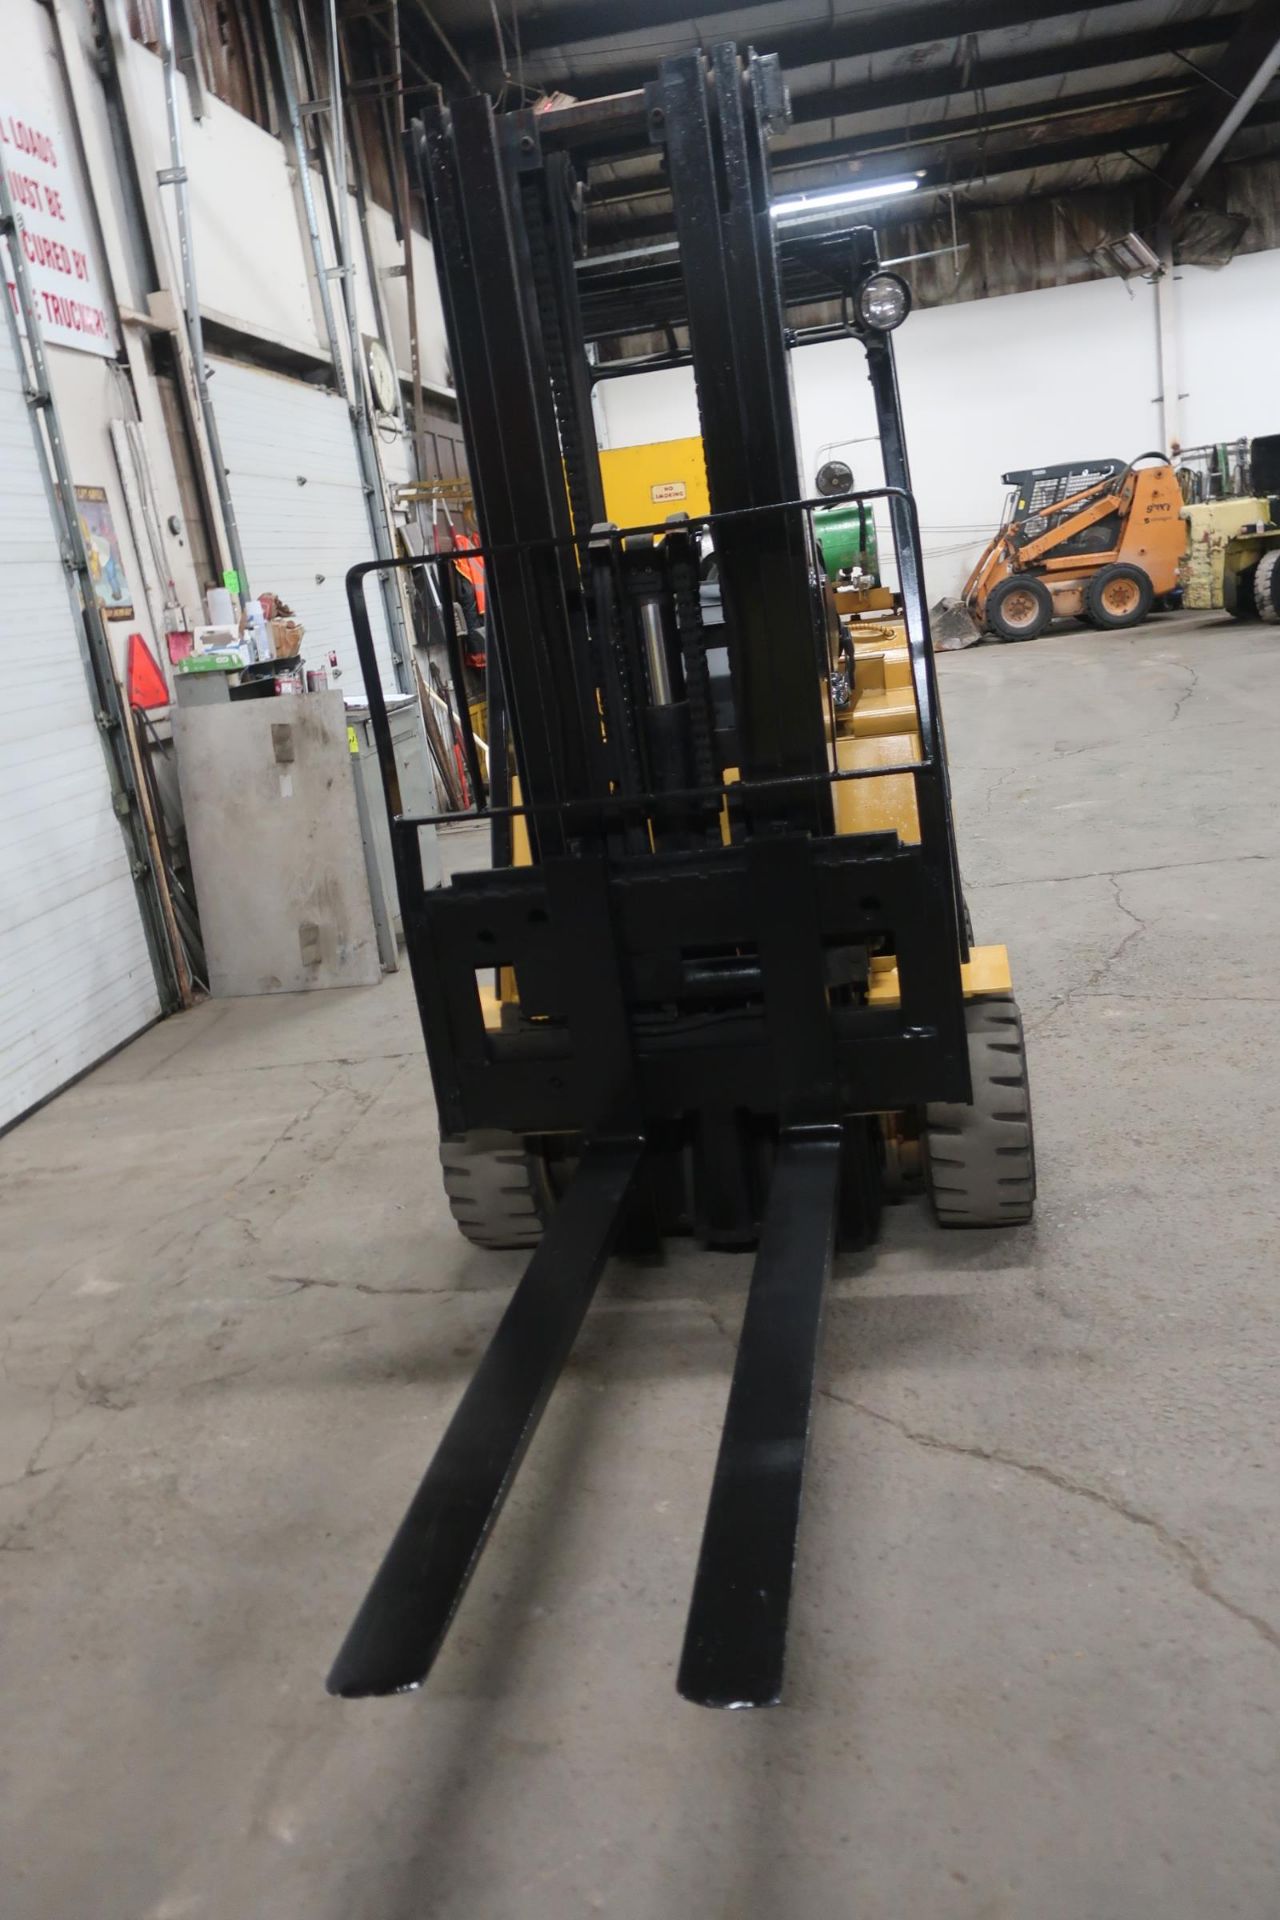 FREE CUSTOMS - CAT 7000lbs capacity LPG (propane) Forklift with sideshift (no propane tank - Image 2 of 2